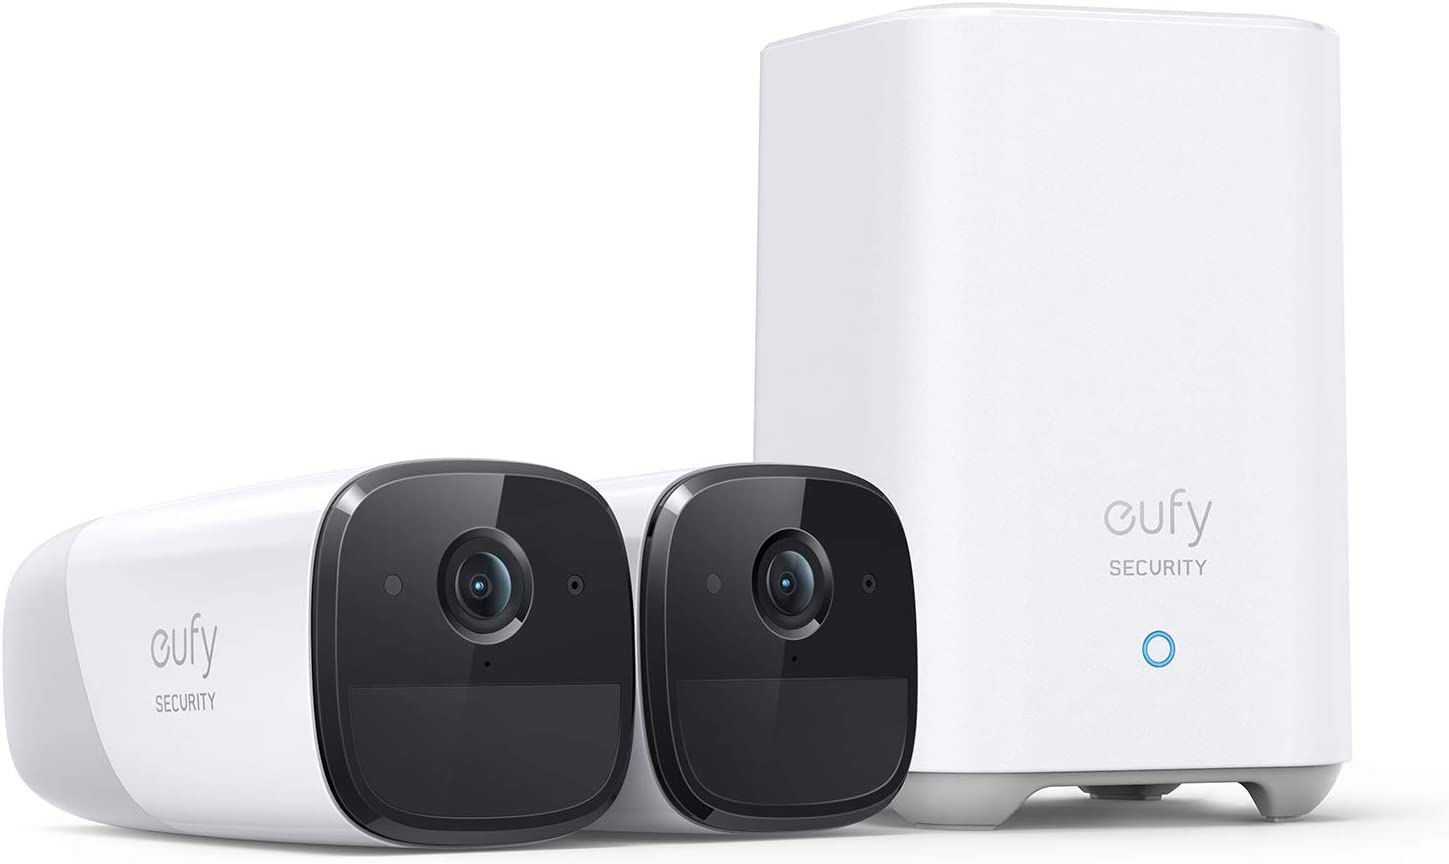 Deal of the Day, 30% Off on eufy Security, eufyCam 2 Pro Wireless Home Security Camera System 2K $244.99 $103.99